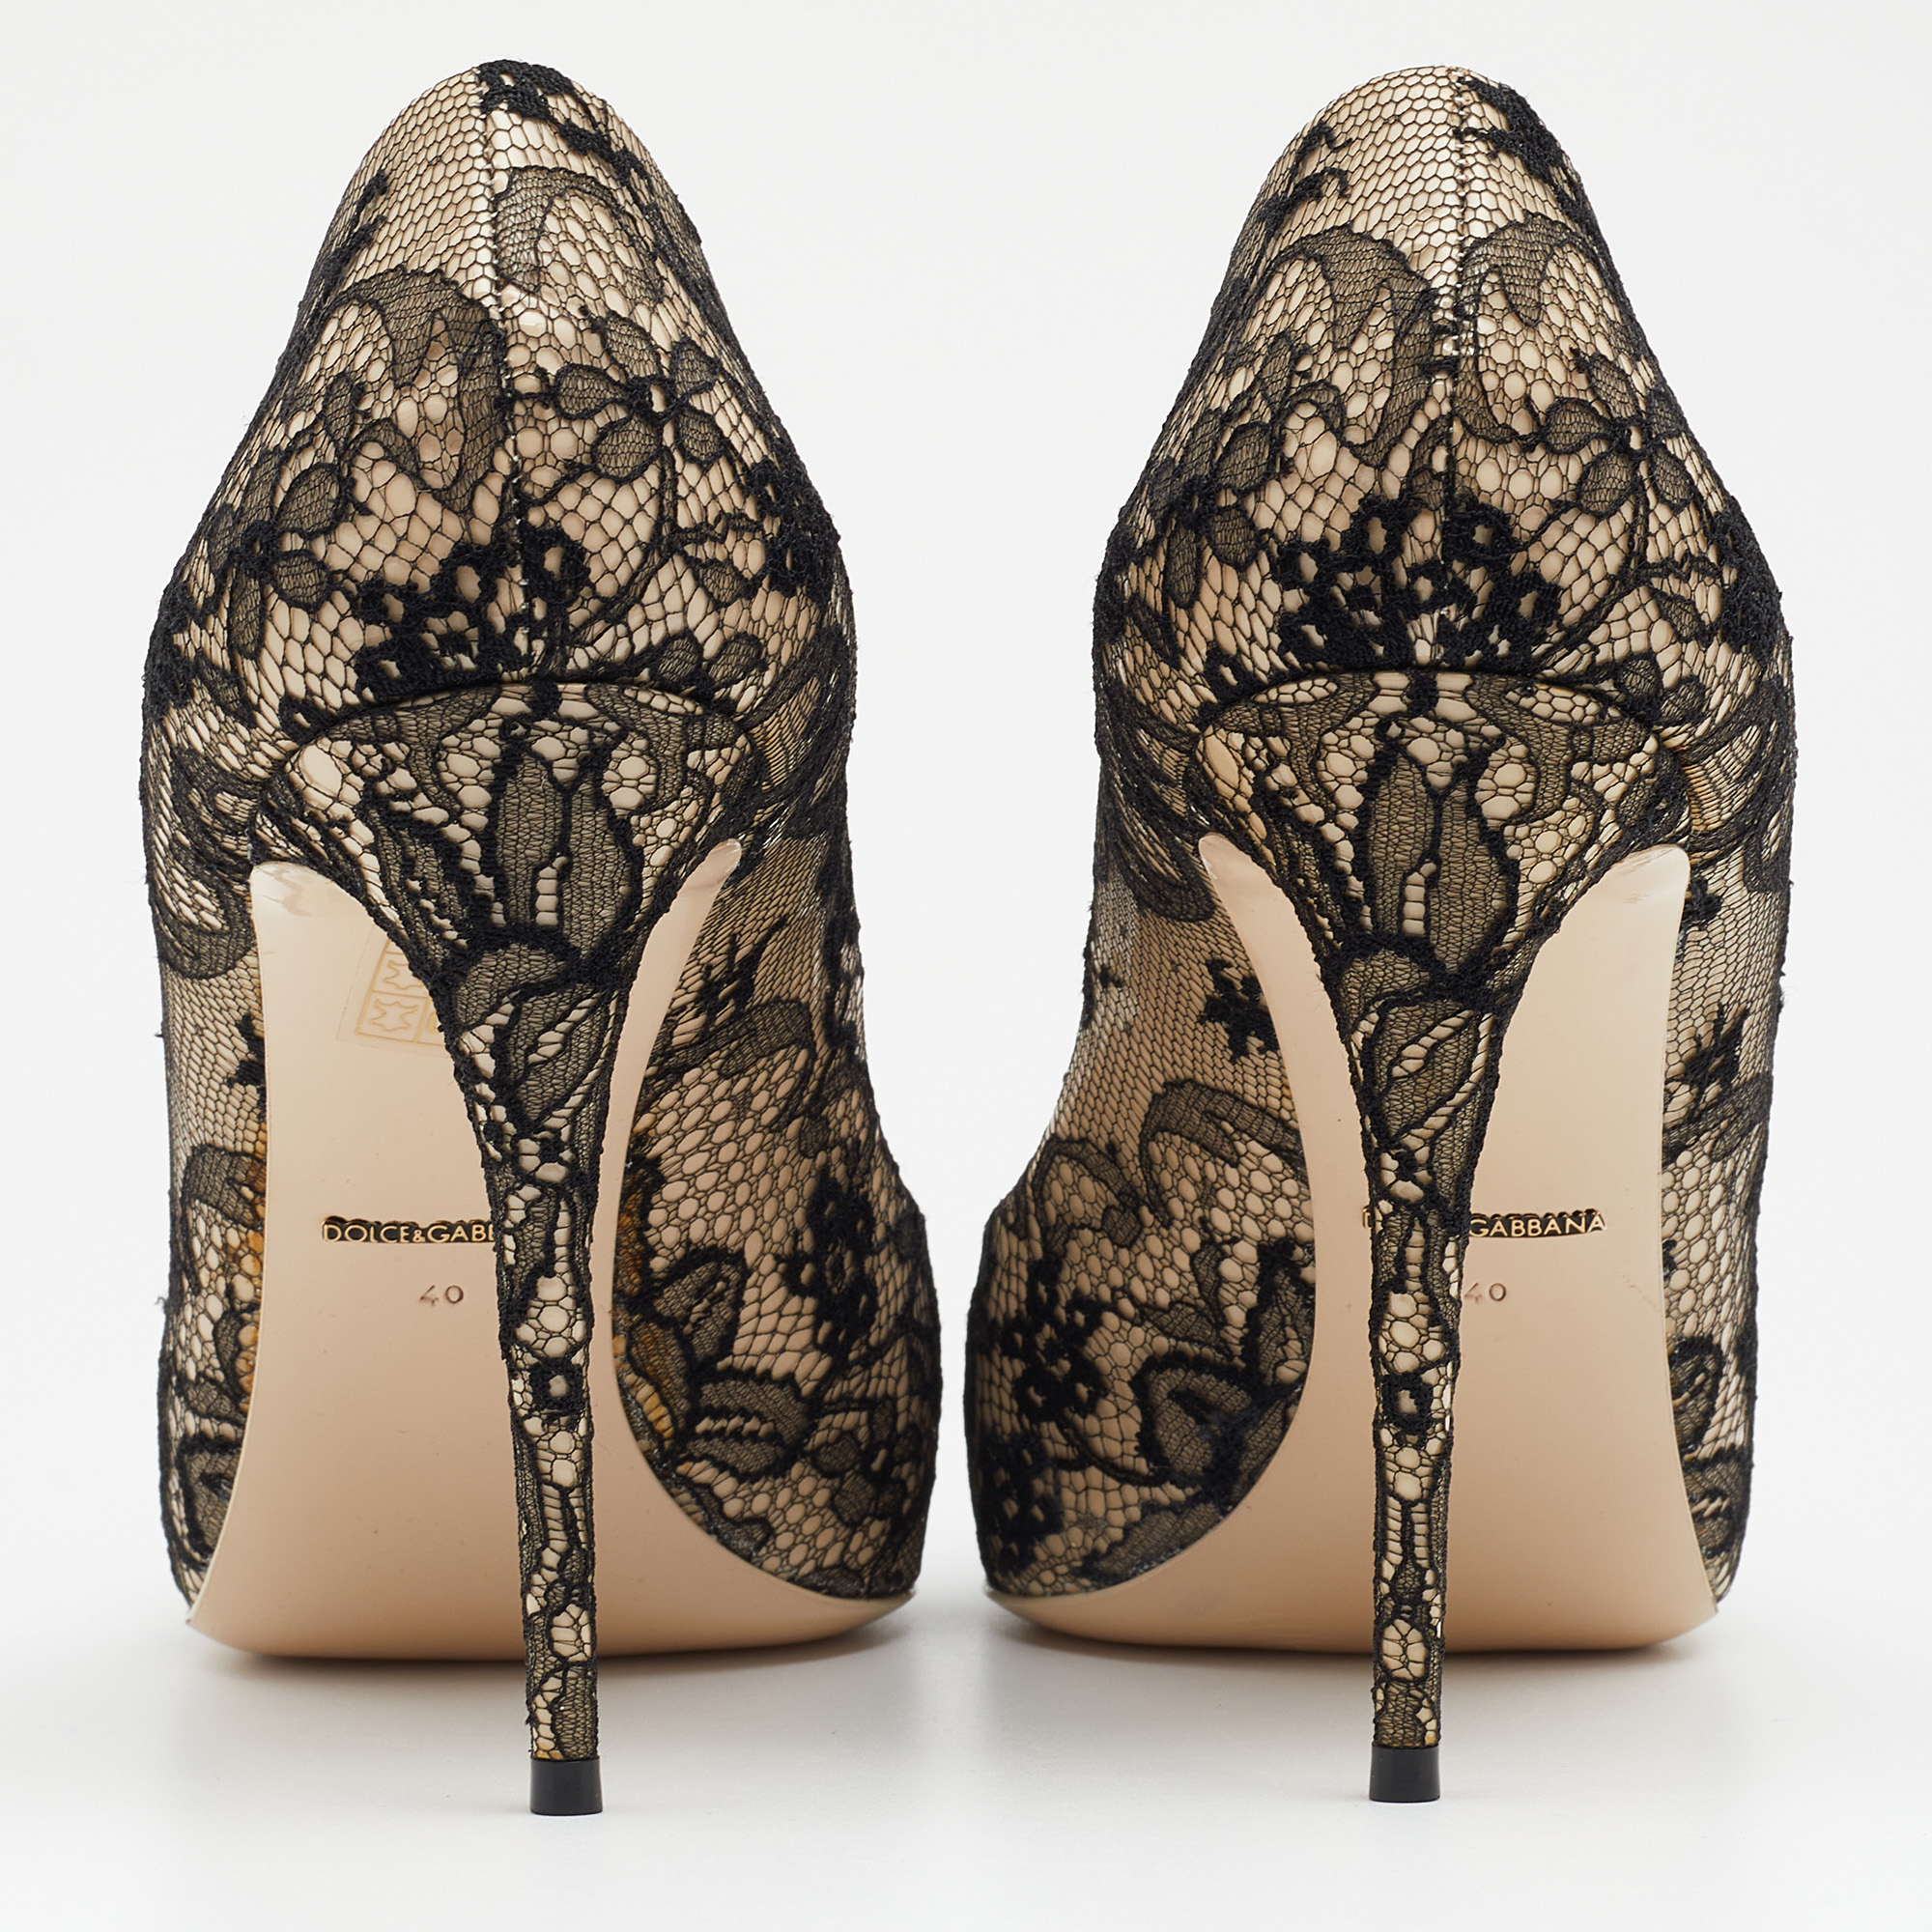 Dolce & Gabbana Black/Beige Floral Lace And Patent Leather Pointed Toe Pumps Size 40